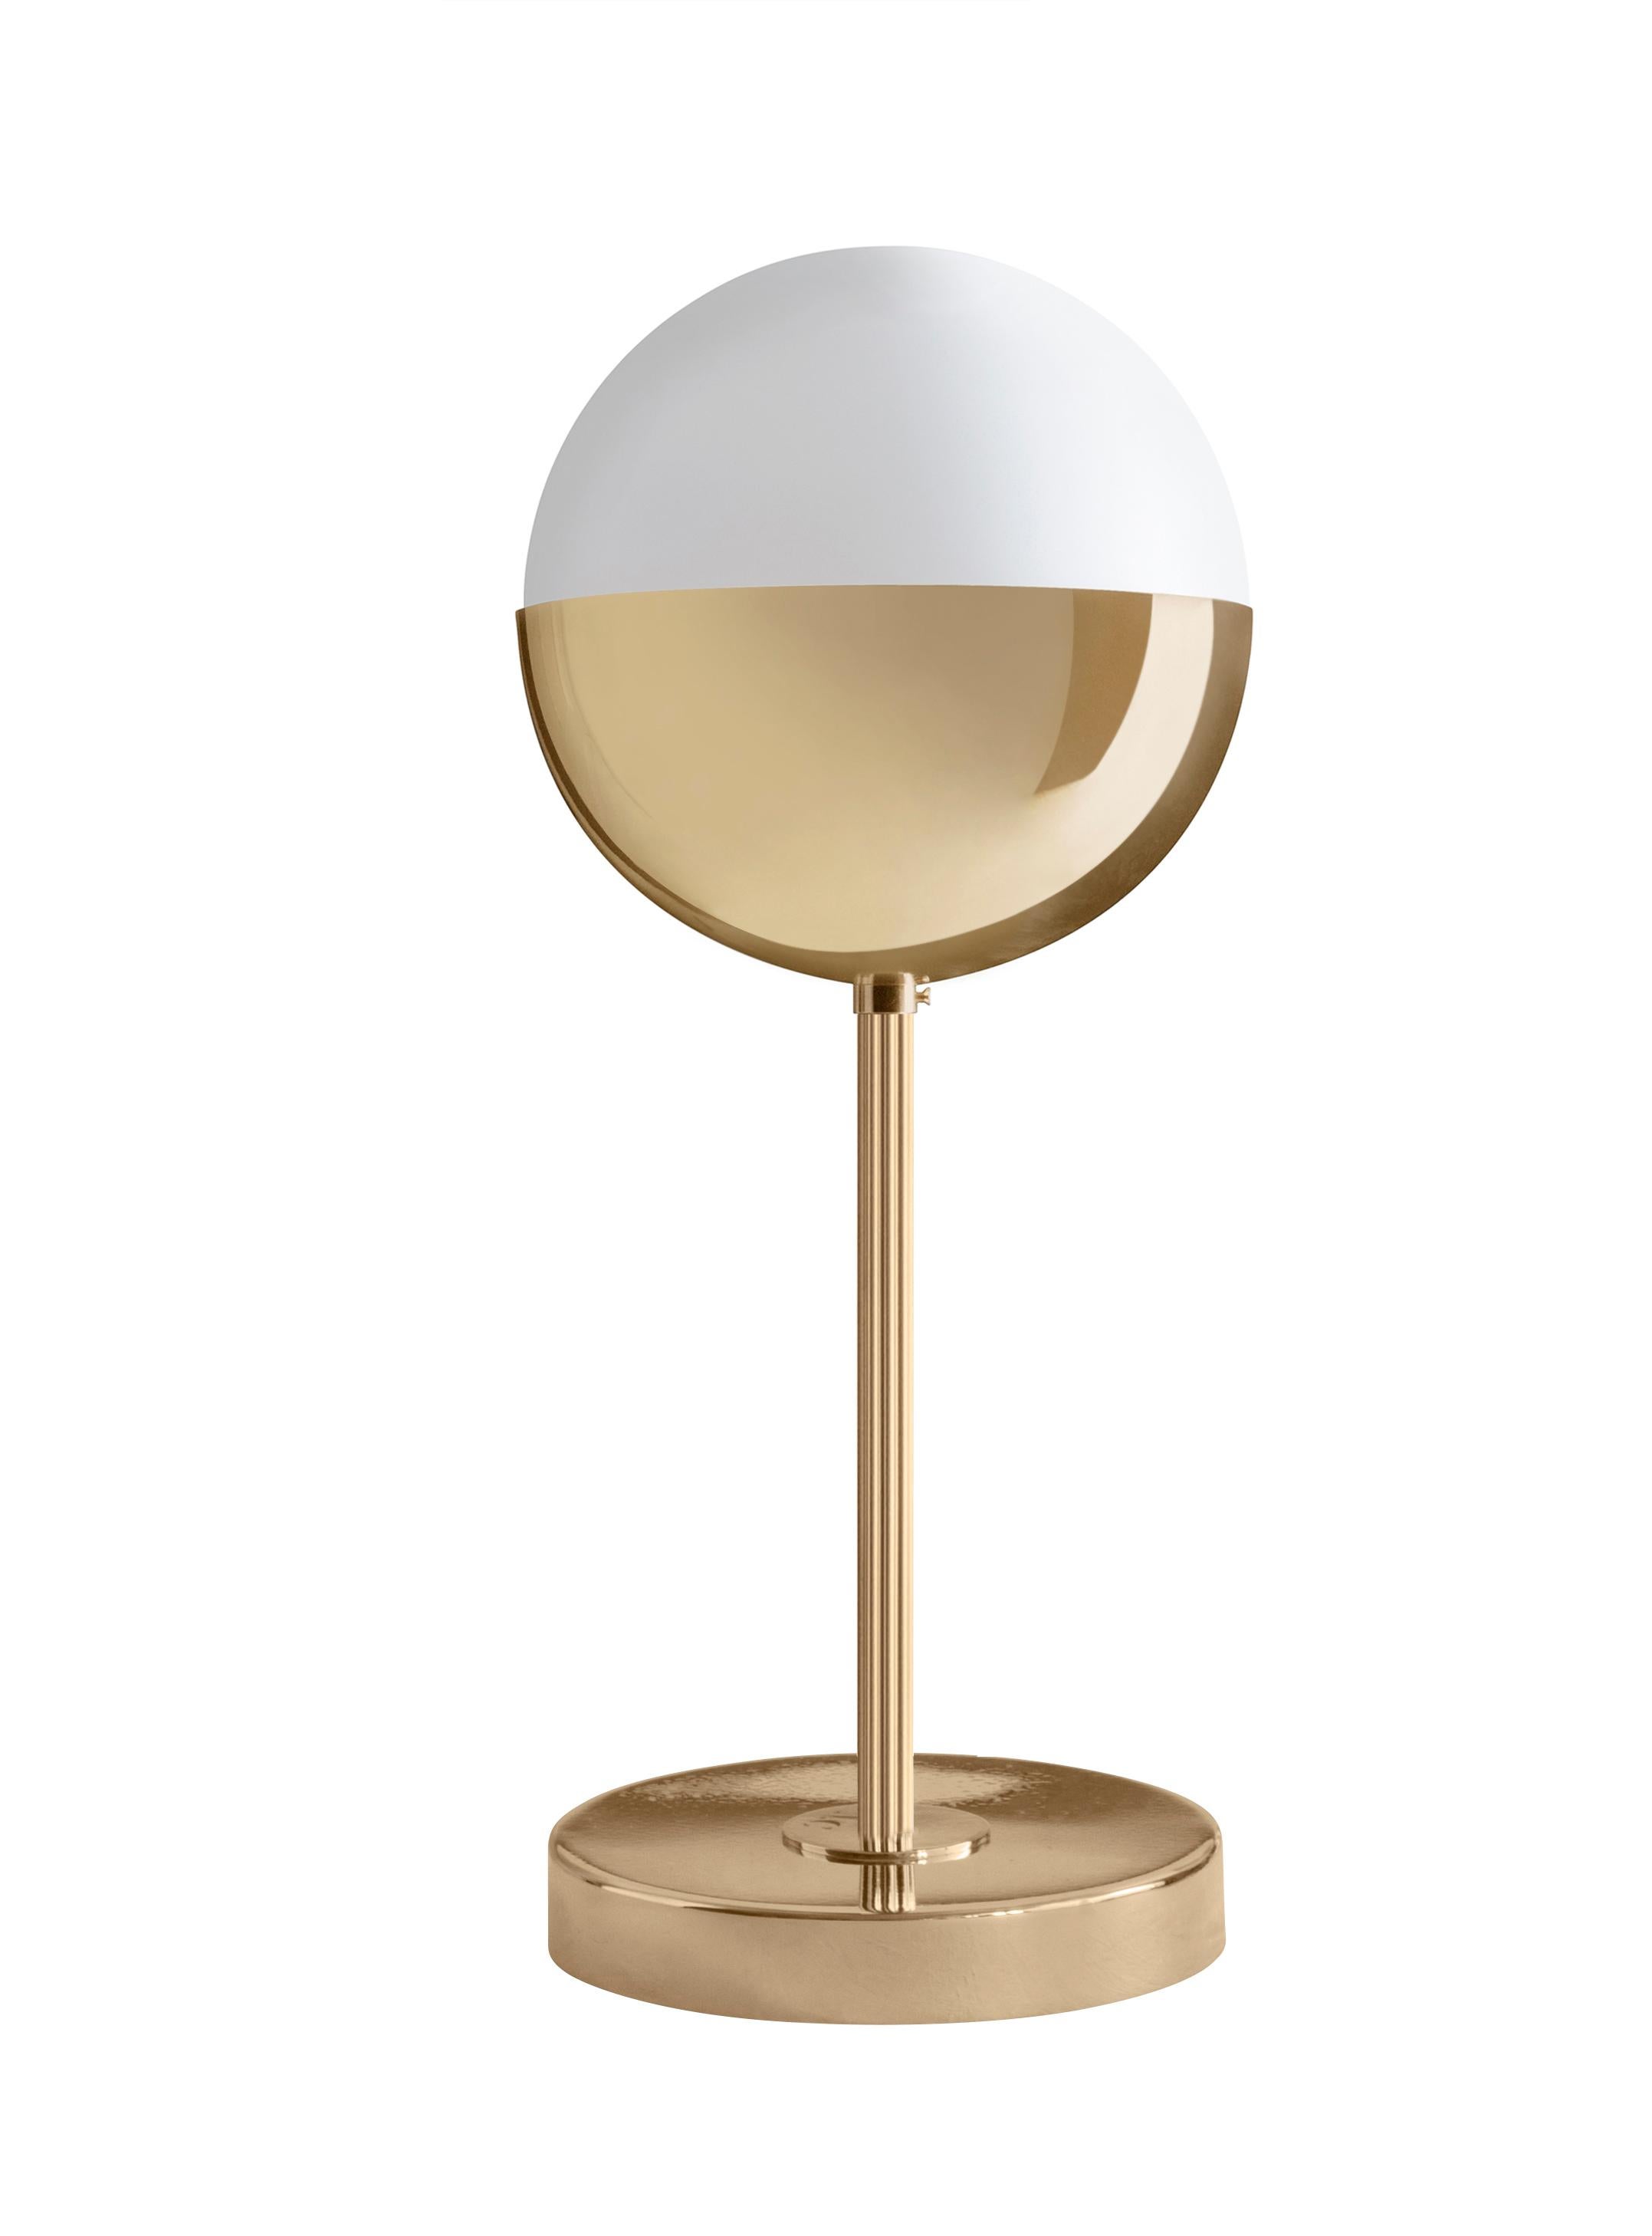 Brass table lamp 01 by Magic Circus Editions
Dimensions: H 50 x W 22 cm
 diameter sphères: 22 cm
Materials: Smooth brass, mouth blown glass

Available Finishes: Brass, nickel
Available colors (central tube): Black, green pine, red wine,